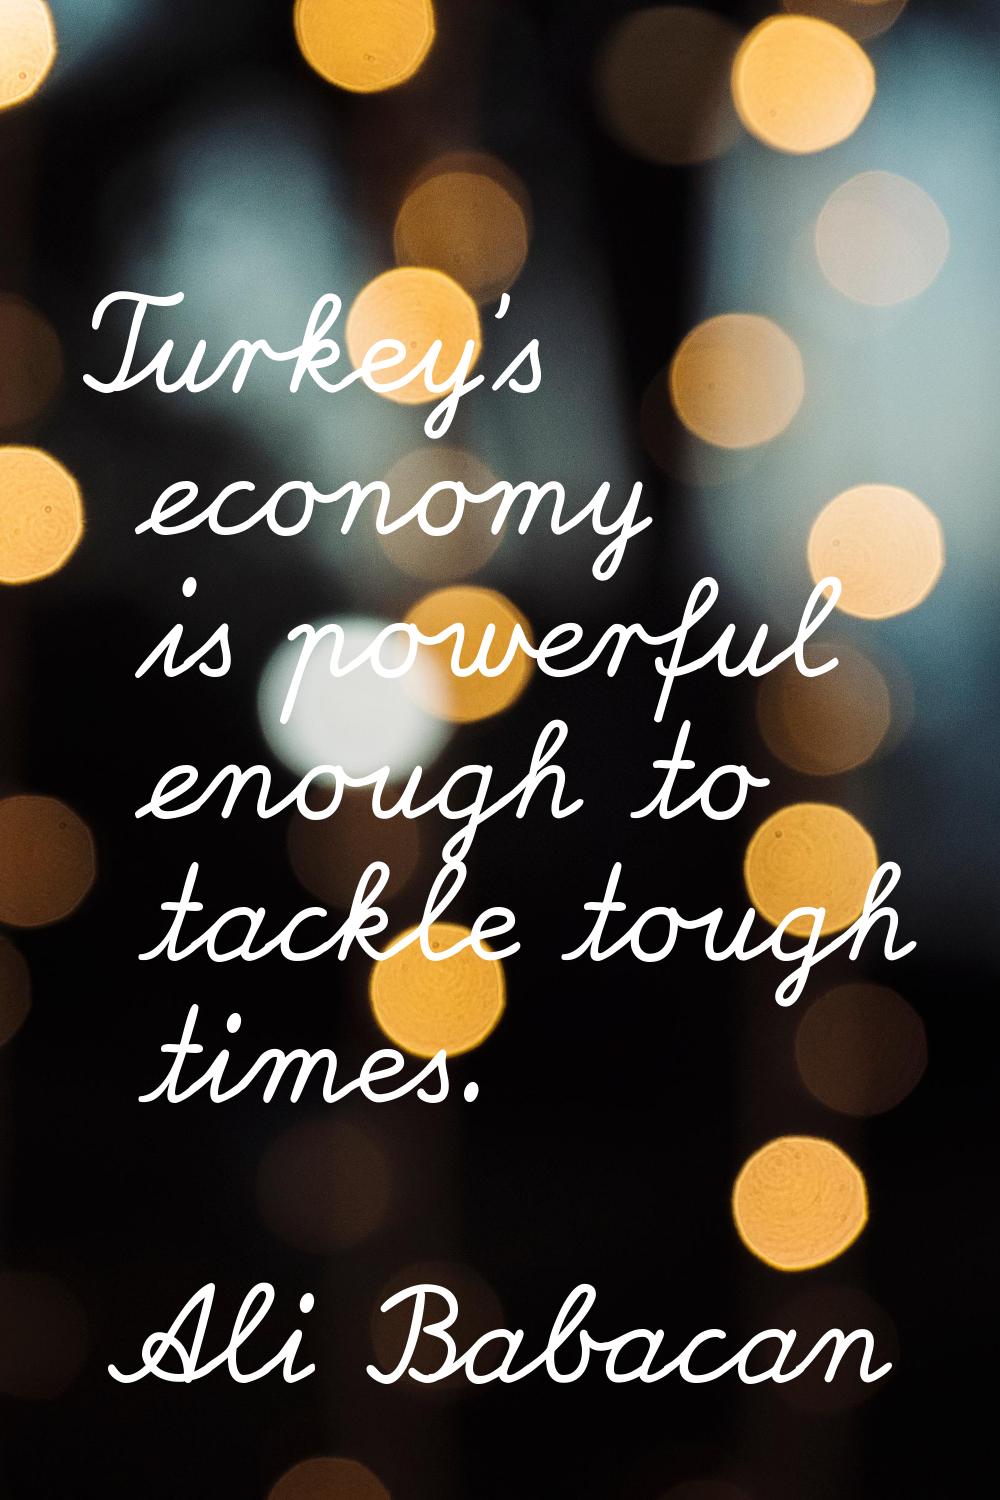 Turkey's economy is powerful enough to tackle tough times.